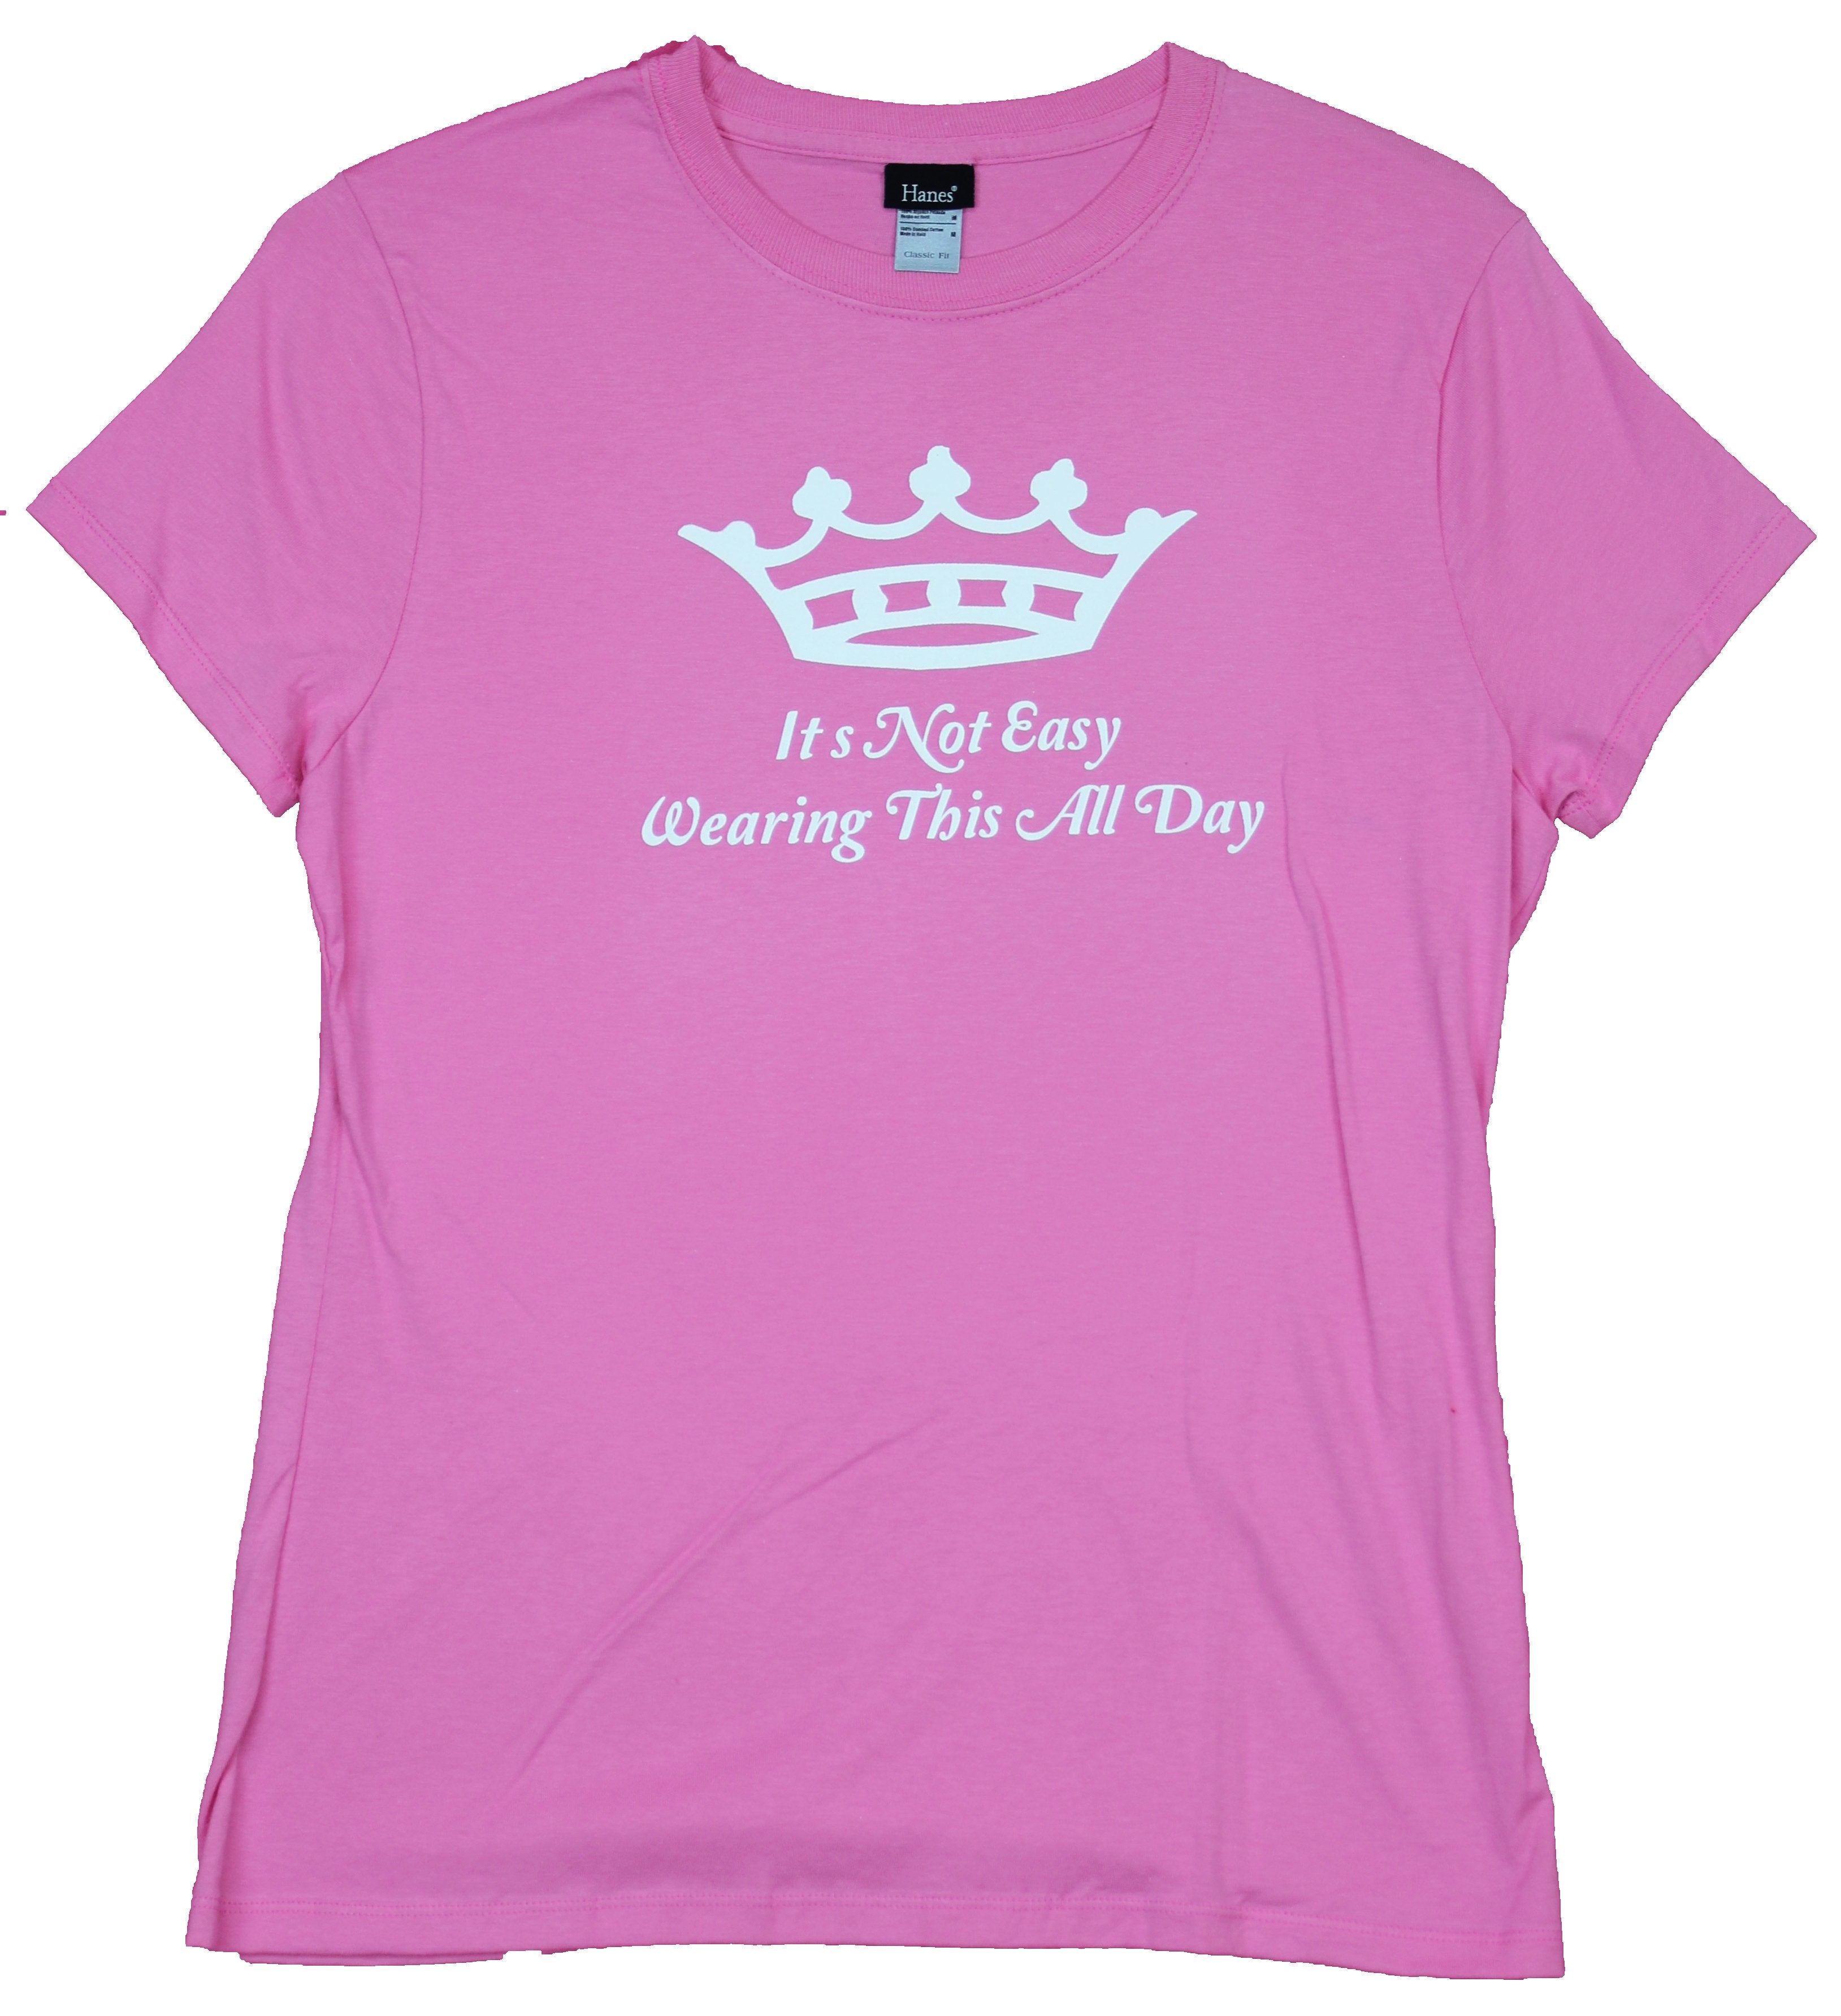 Queen Crown Girls Juniors T-Shirt  - It's Not Easy Wearing This All Day